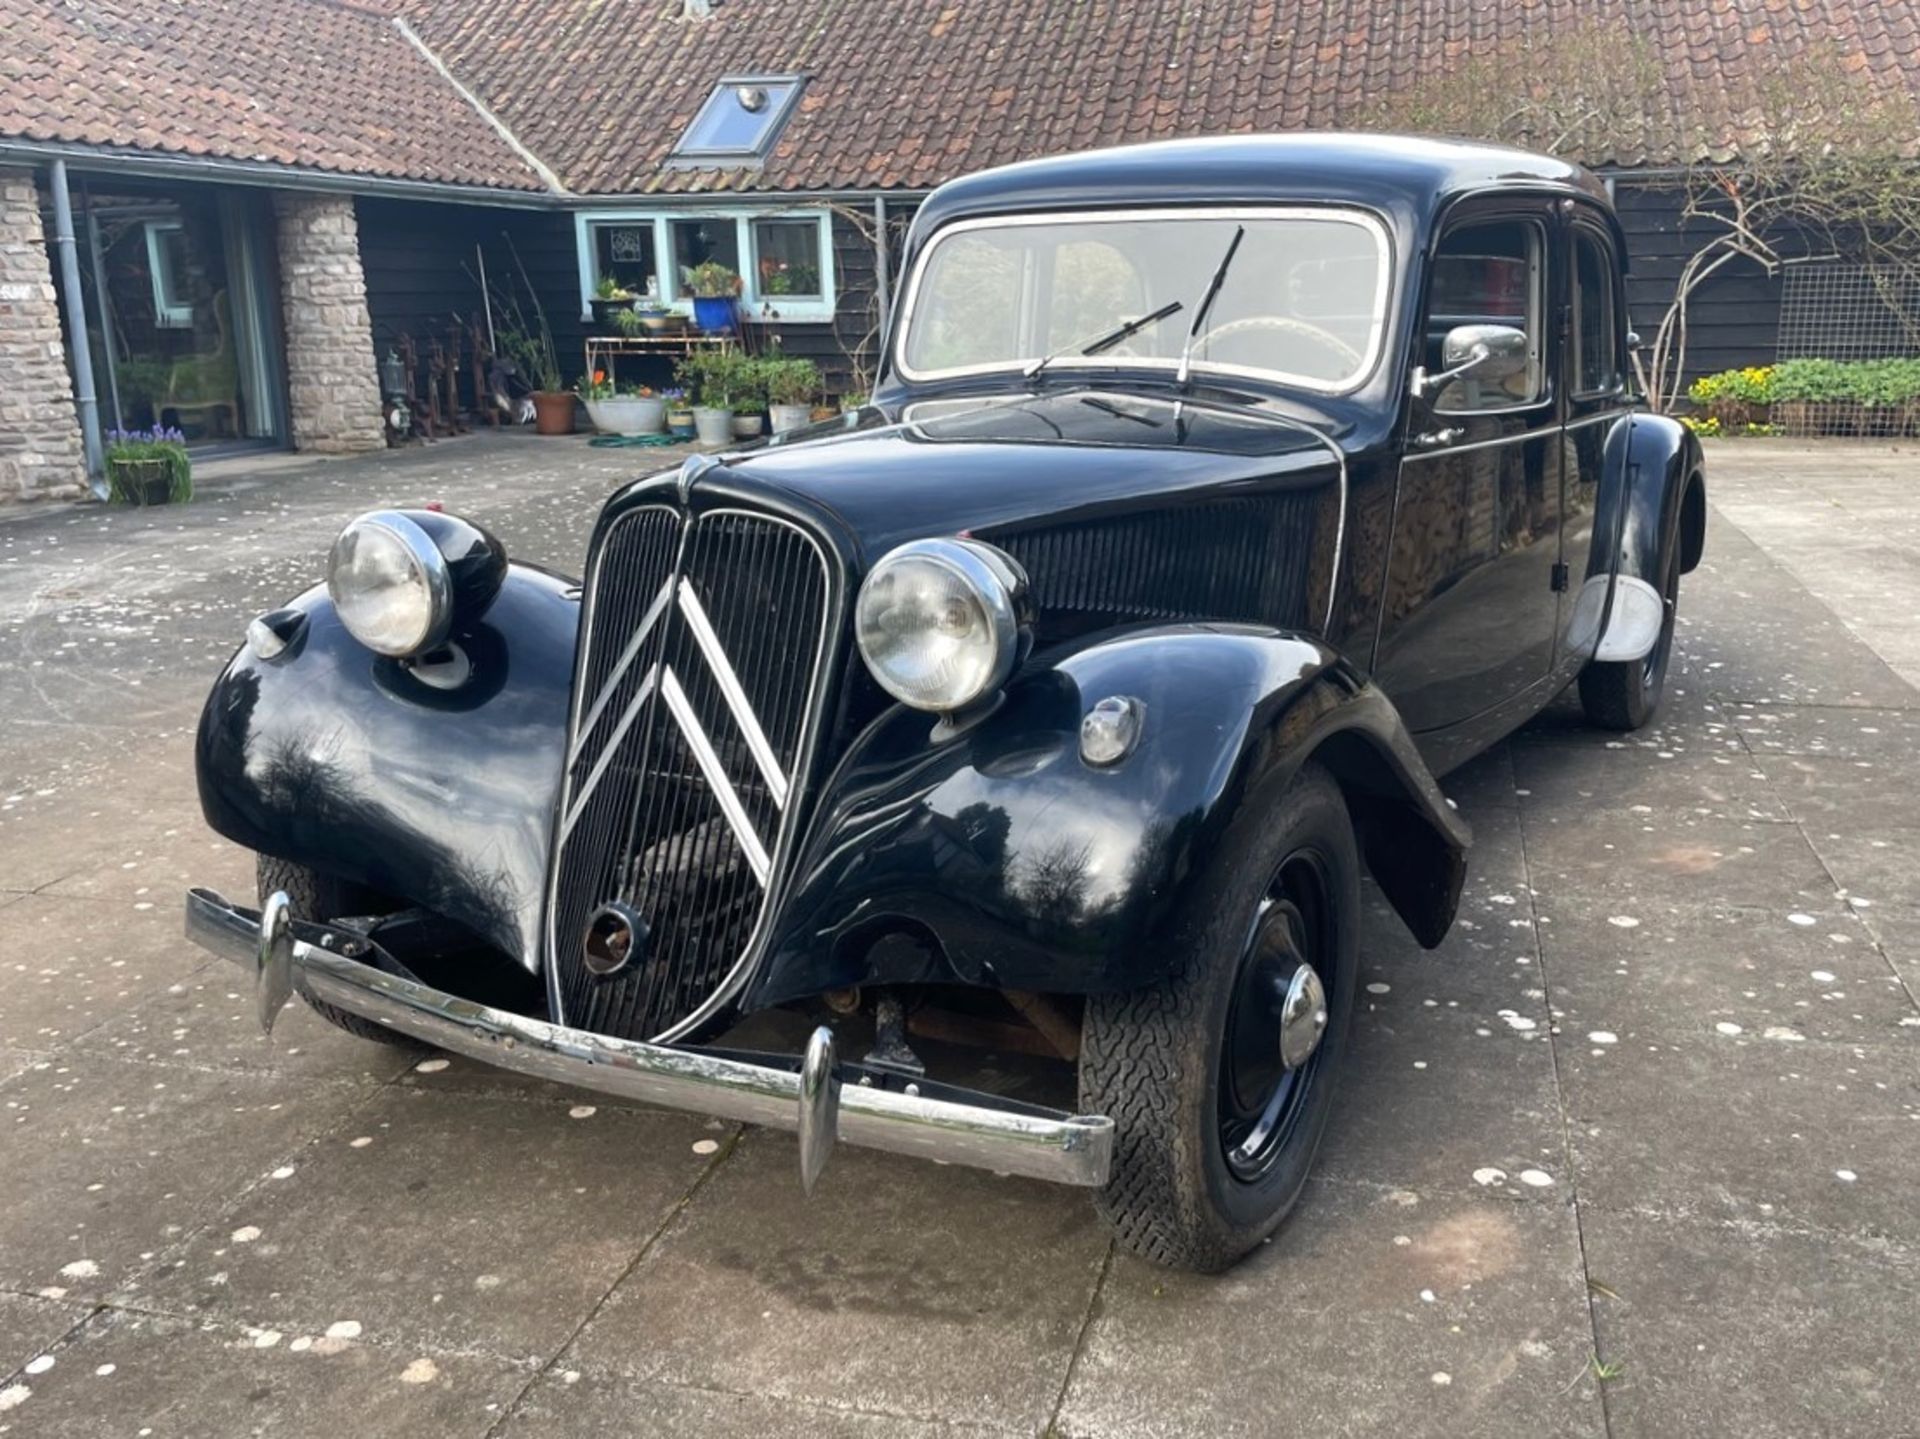 1956 CITROEN TRACTION AVANT 11BL ‘MALLE BOMBE’ Registration Number: LSU 513 Chassis Number: TBA